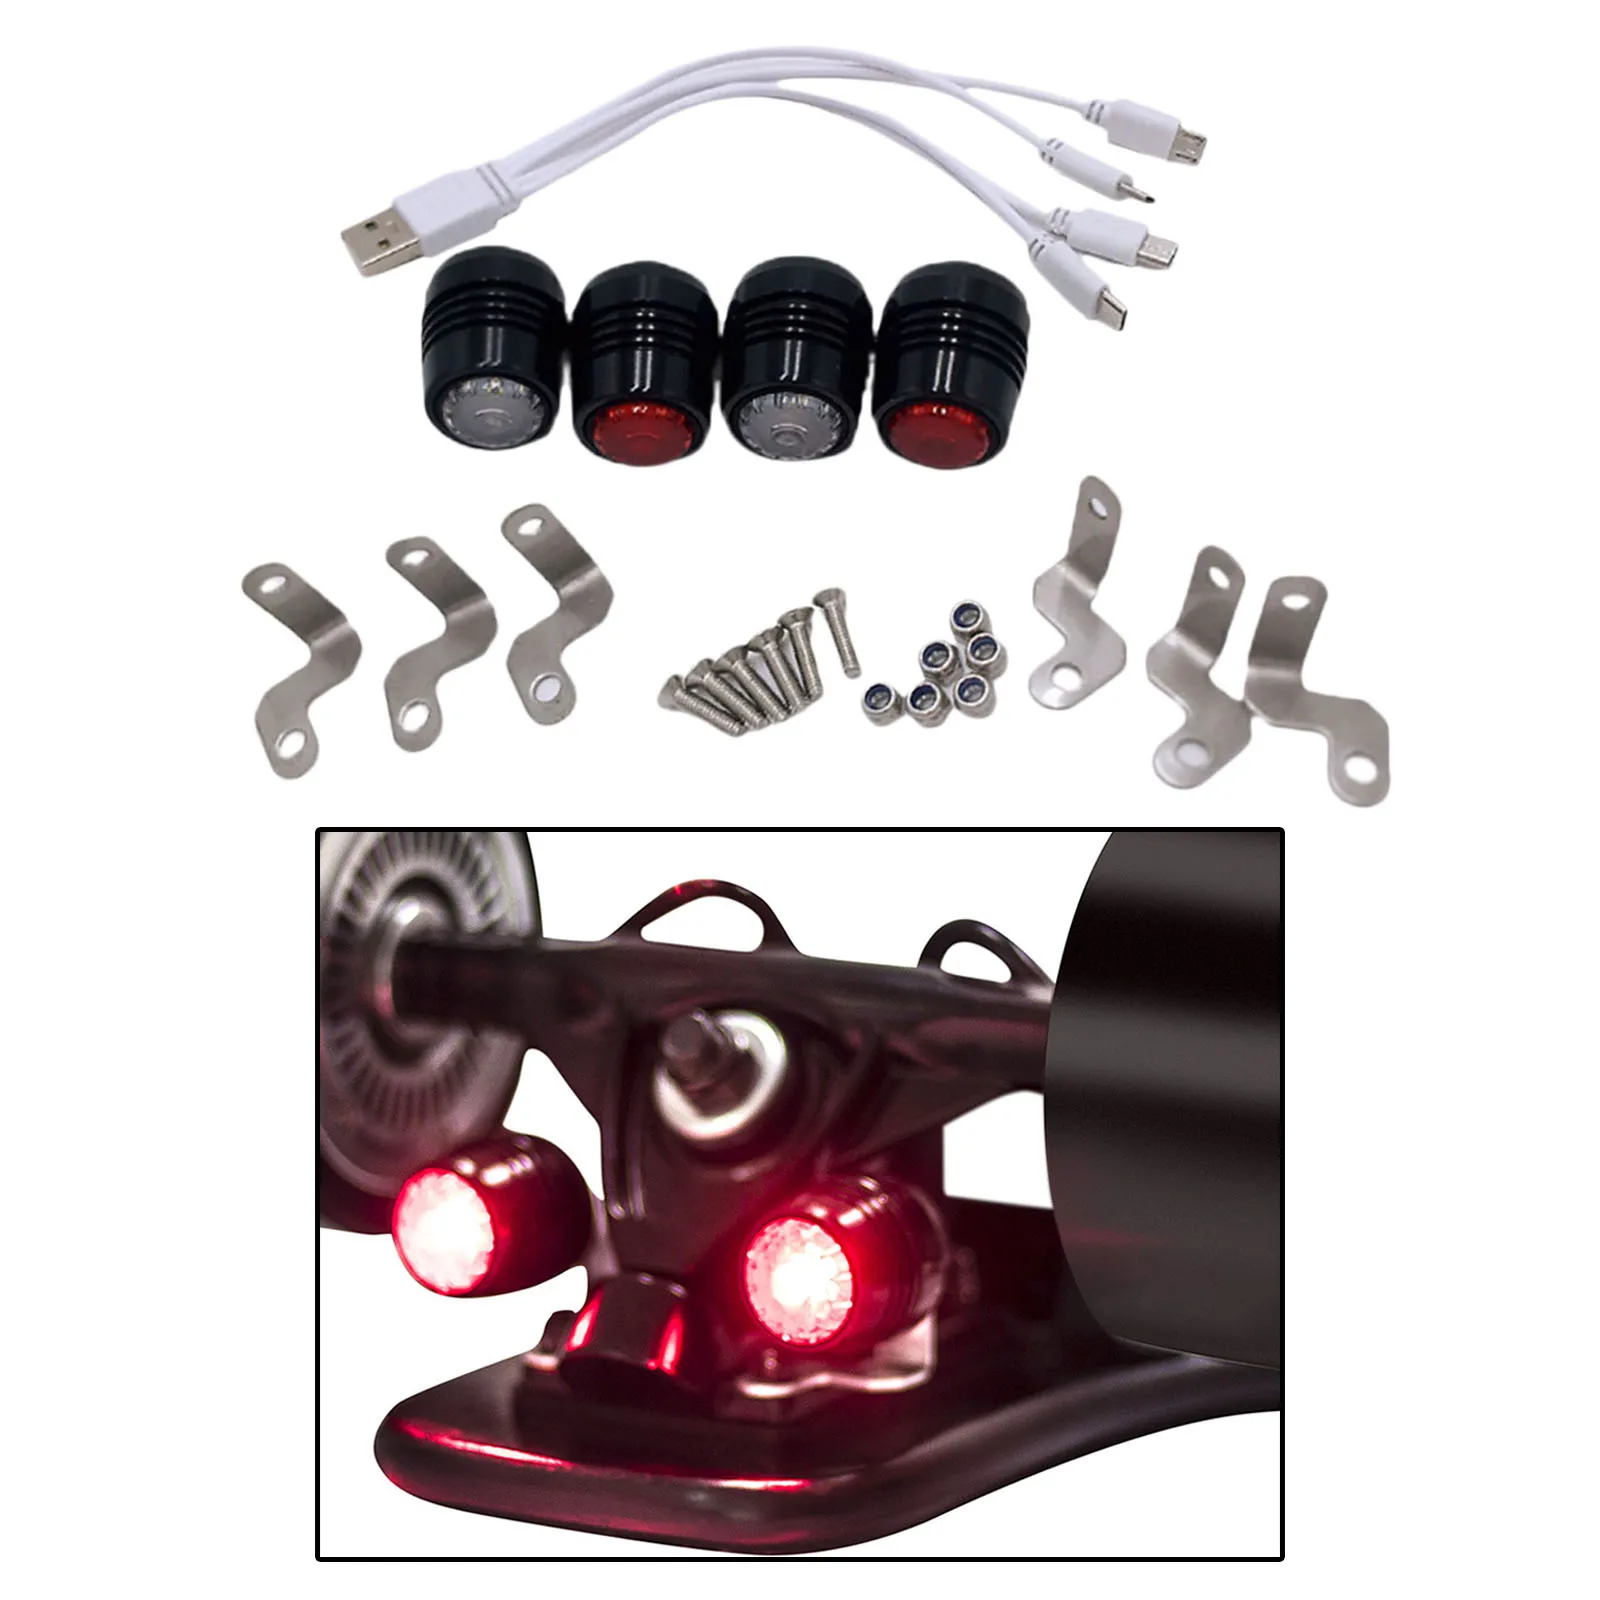 4Pcs Skateboard LED Lights Night Warning Lamp for Longboard Scooters Accessories Safety Lighting Parts